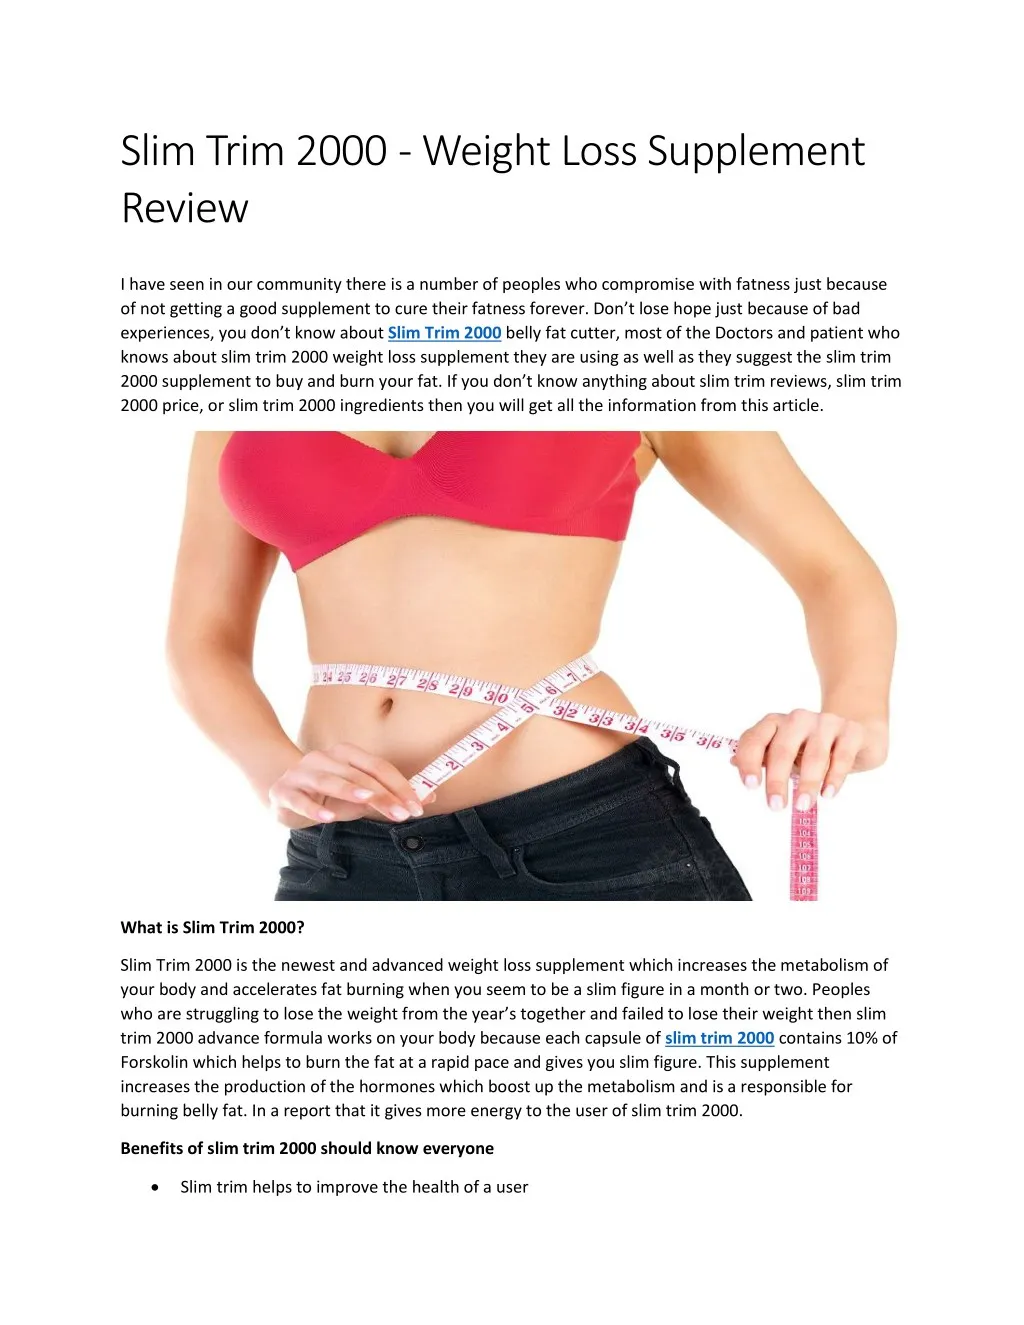 slim trim 2000 weight loss supplement review